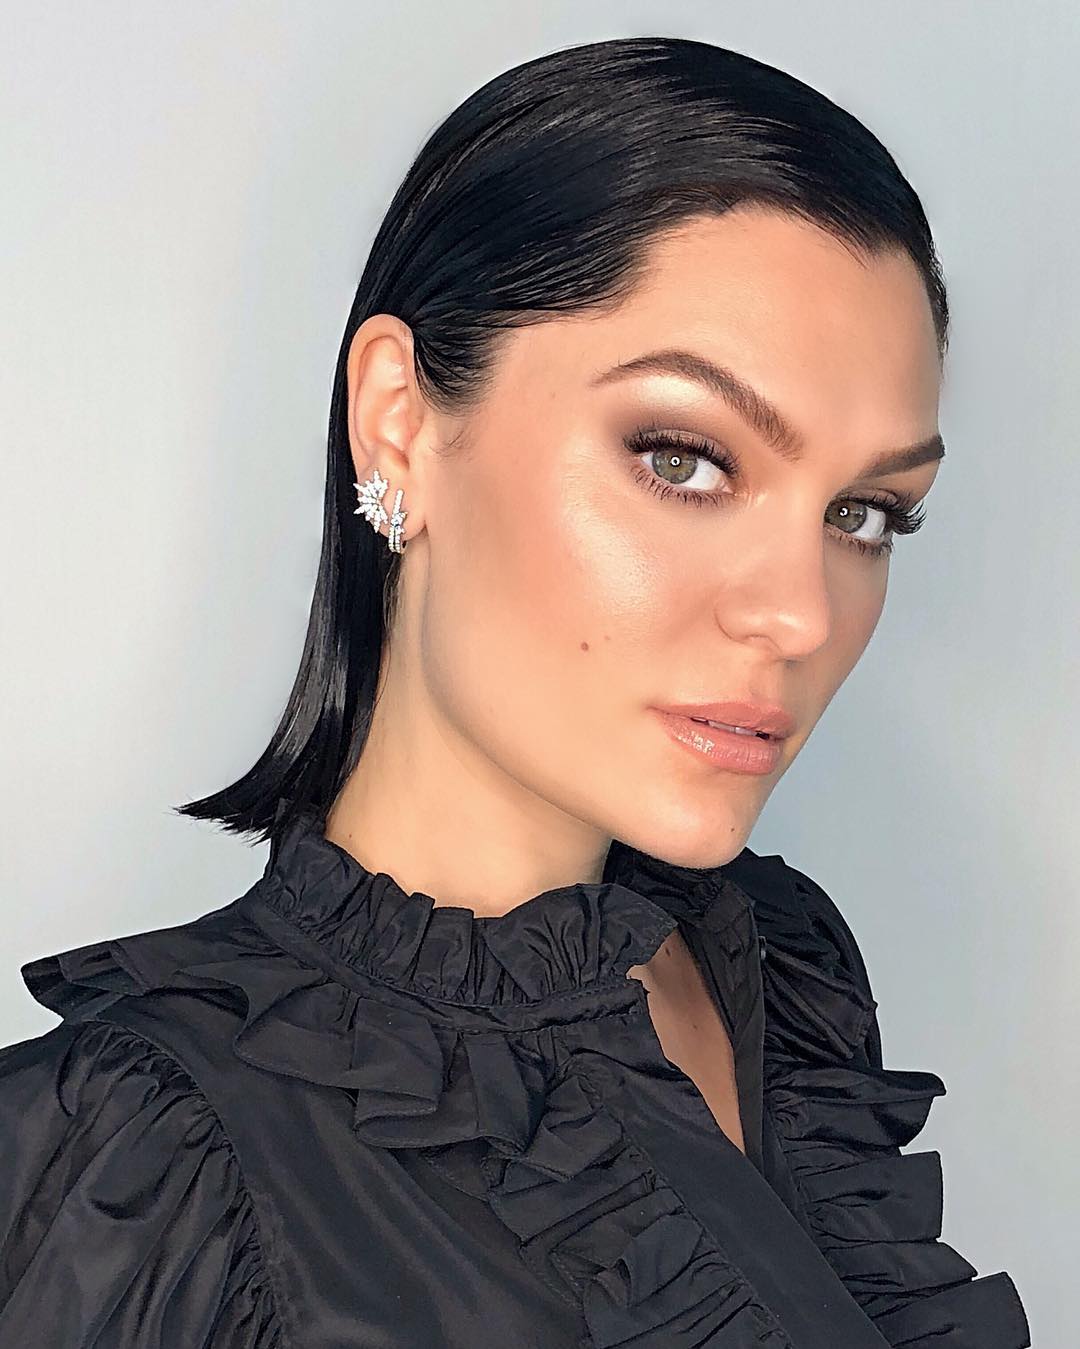 55+ Hot Pictures Of Jessie J That Will Make Your Heart Thump For Her | Best Of Comic Books